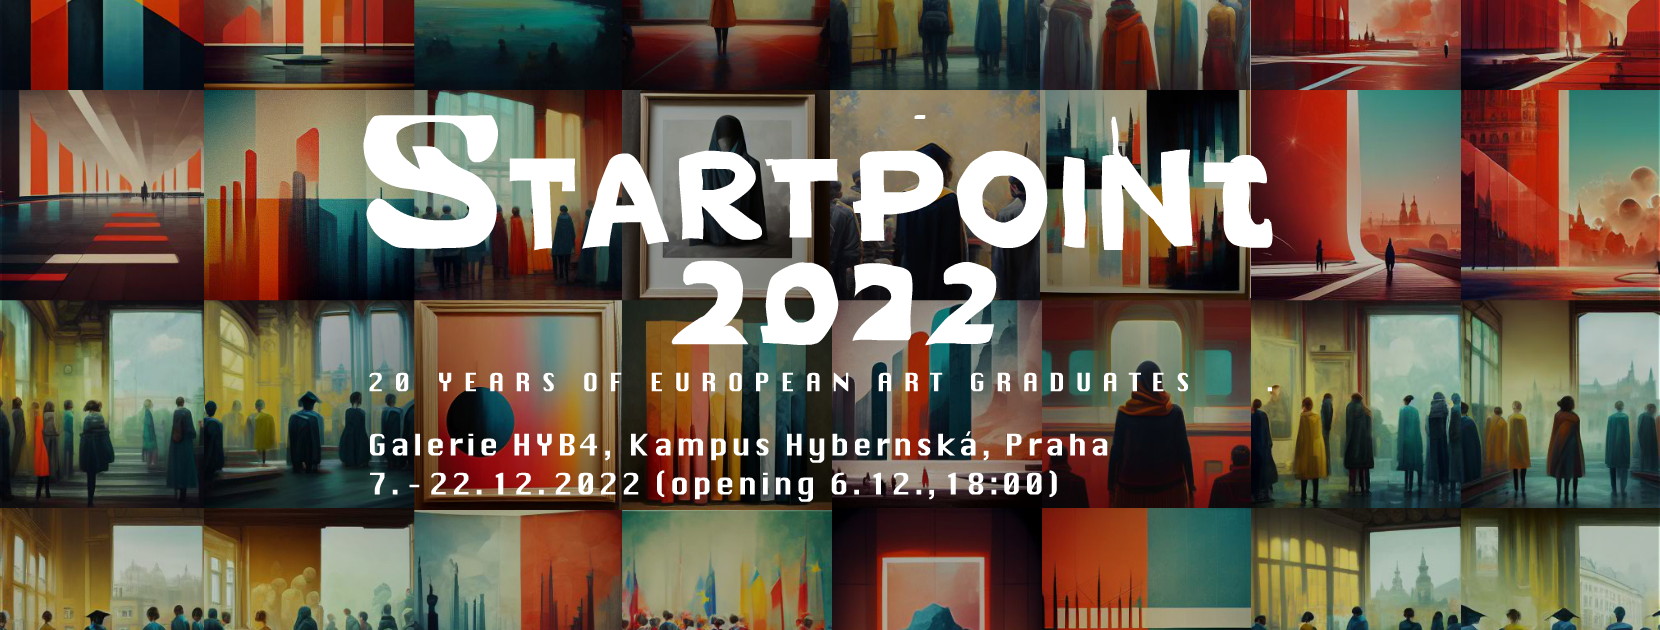 Startpoint Prize 2022 - Coming soon!